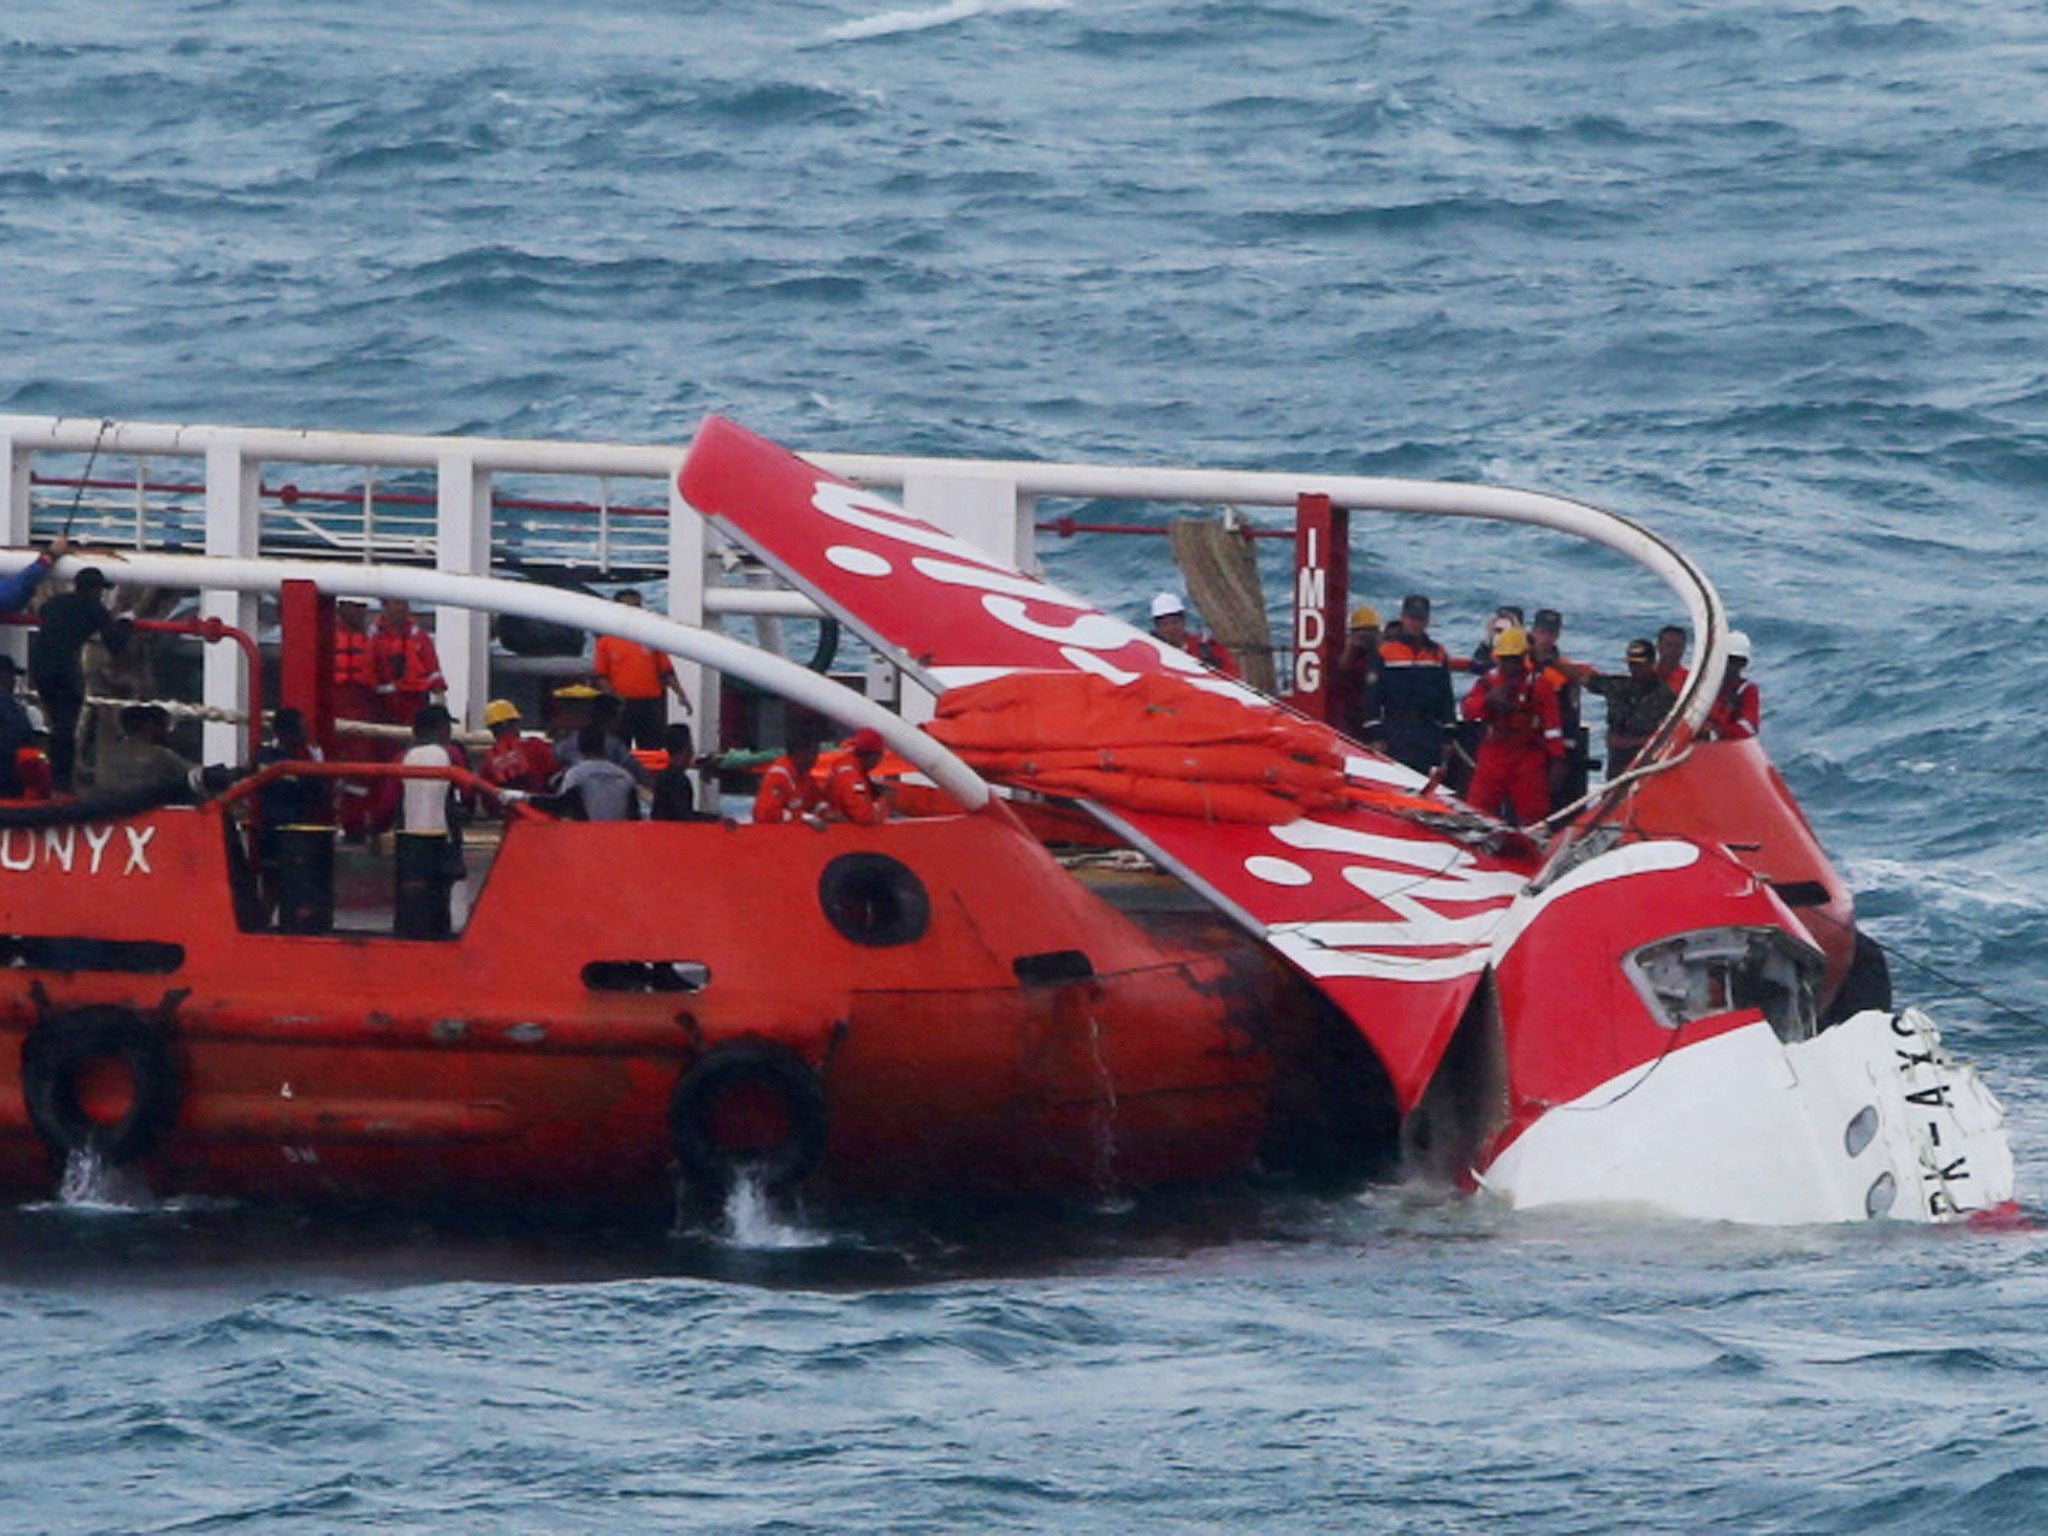 Indonesian search and rescue personnel pull wreckage of AirAsia flight QZ8501 onto the Crest Onyx ship at sea